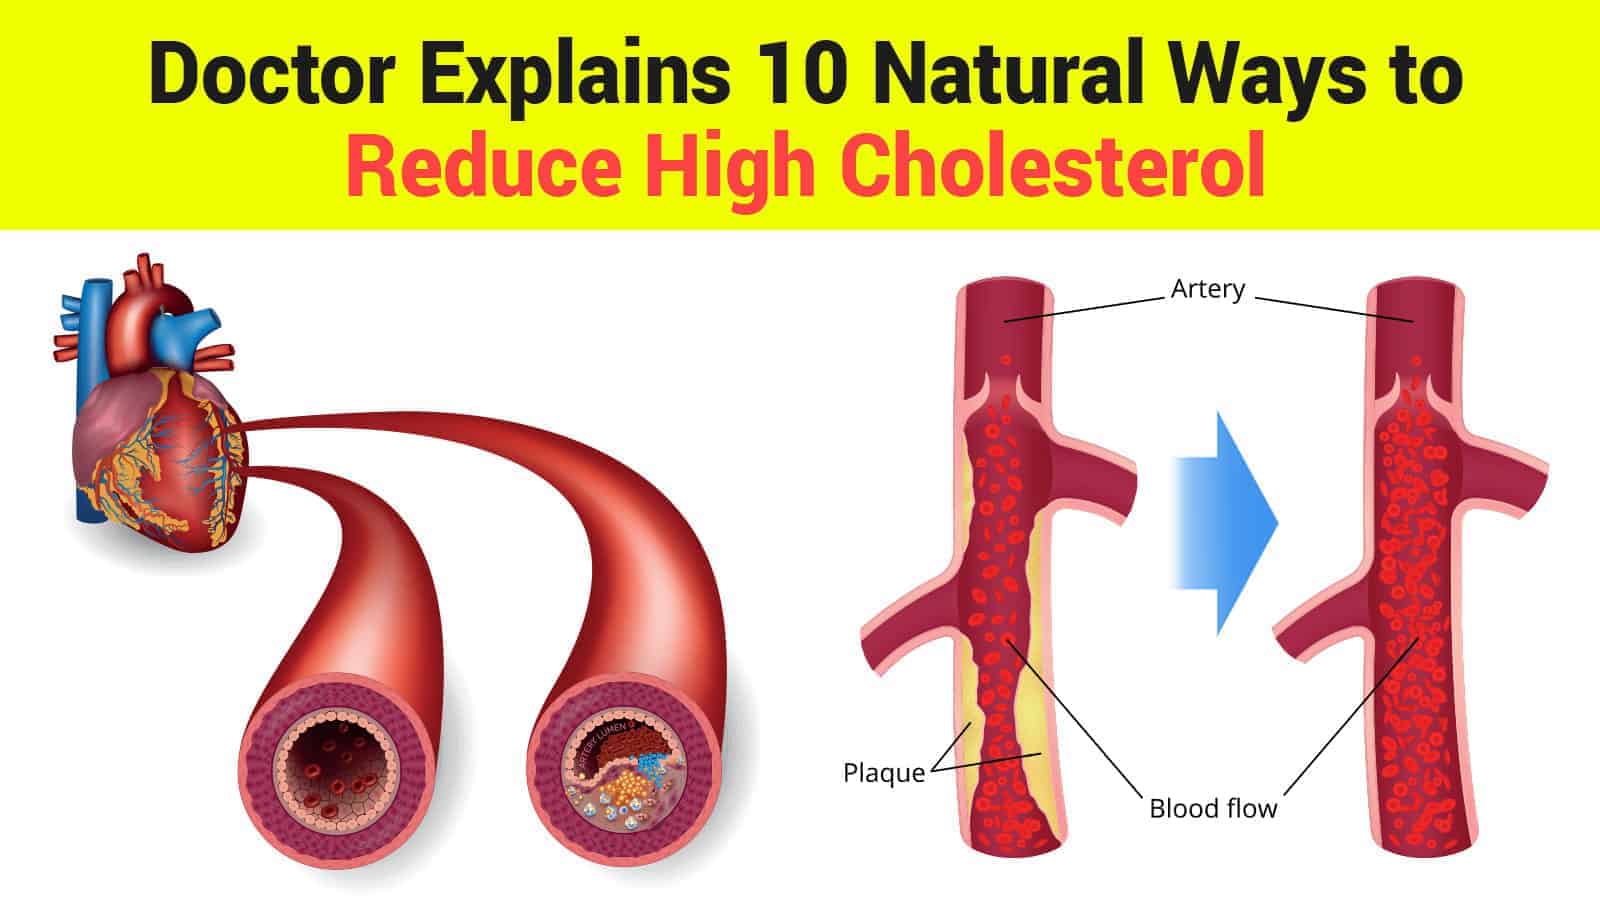 Doctor Explains 10 Natural Ways to Reduce High Cholesterol